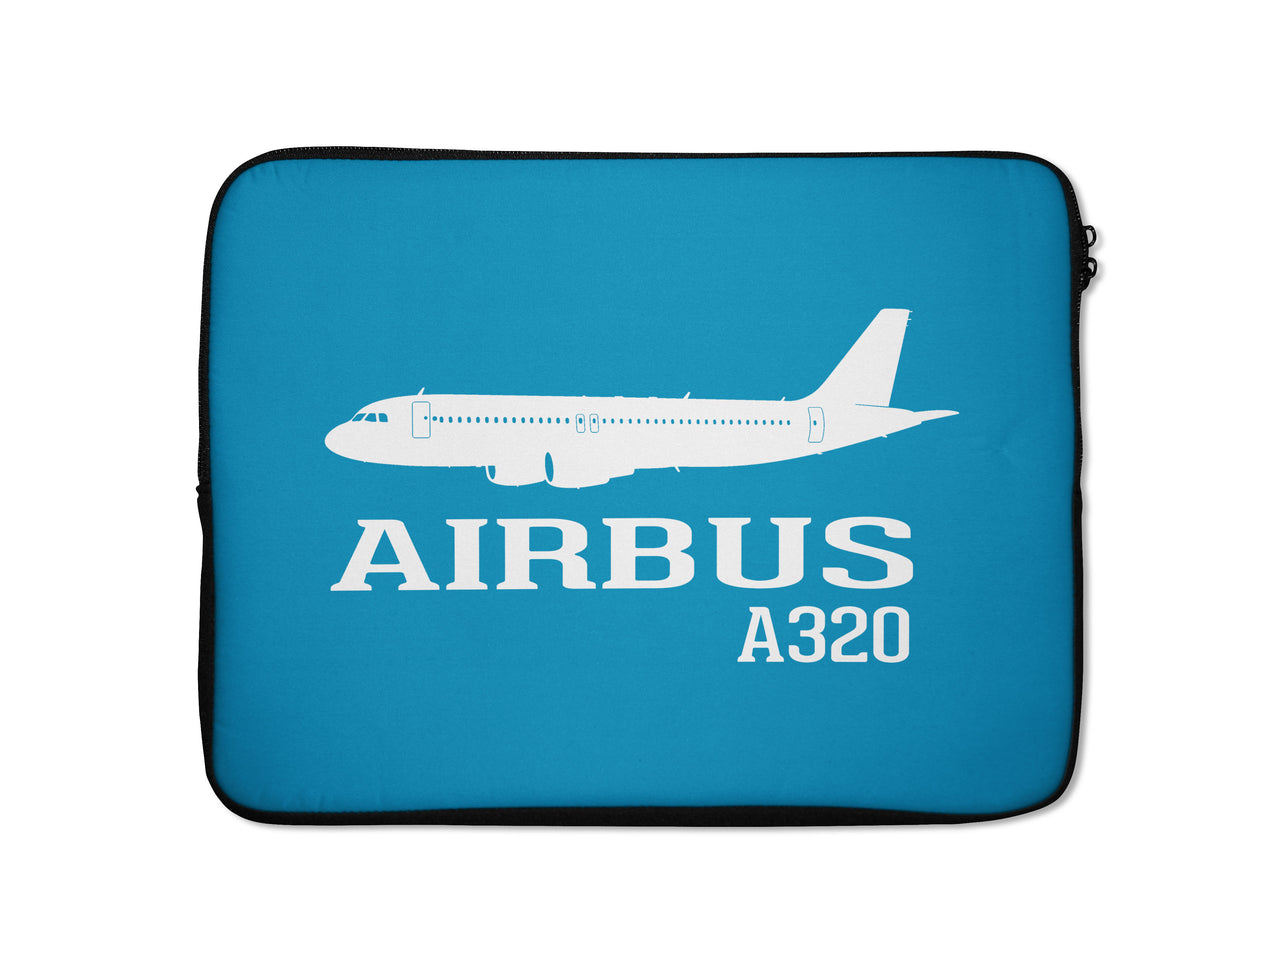 Airbus A320 Printed Designed Laptop & Tablet Cases